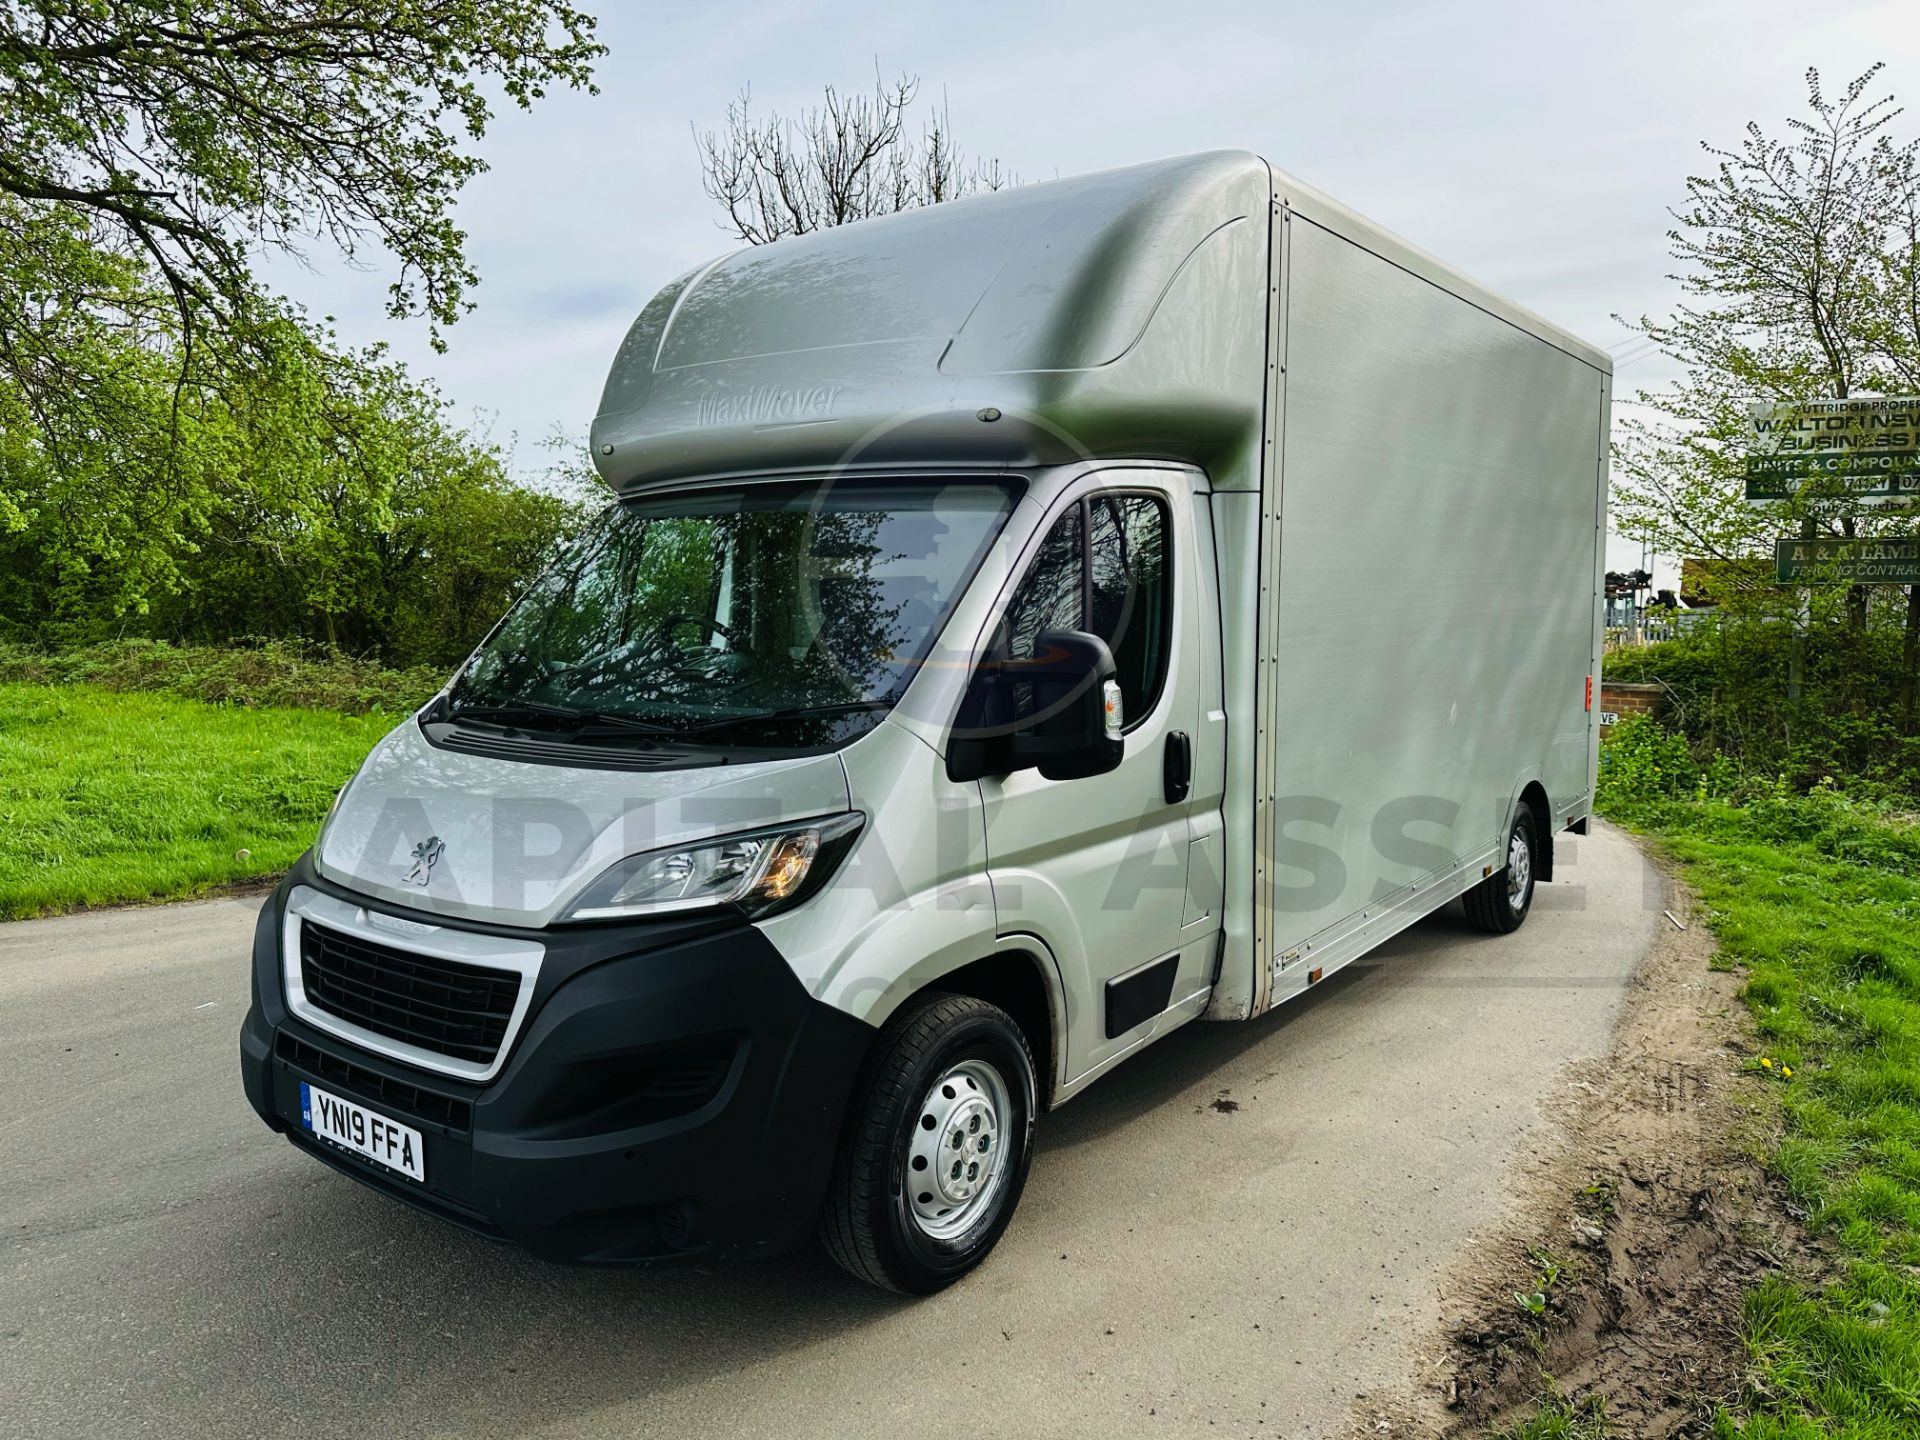 (ON SALE) PEUGEOT BOXER 335 *LWB LOW LOADER / MAXI MOVER LUTON* (2019 - EURO 6) 2.0 BLUE HDI *A/C* - Image 4 of 27